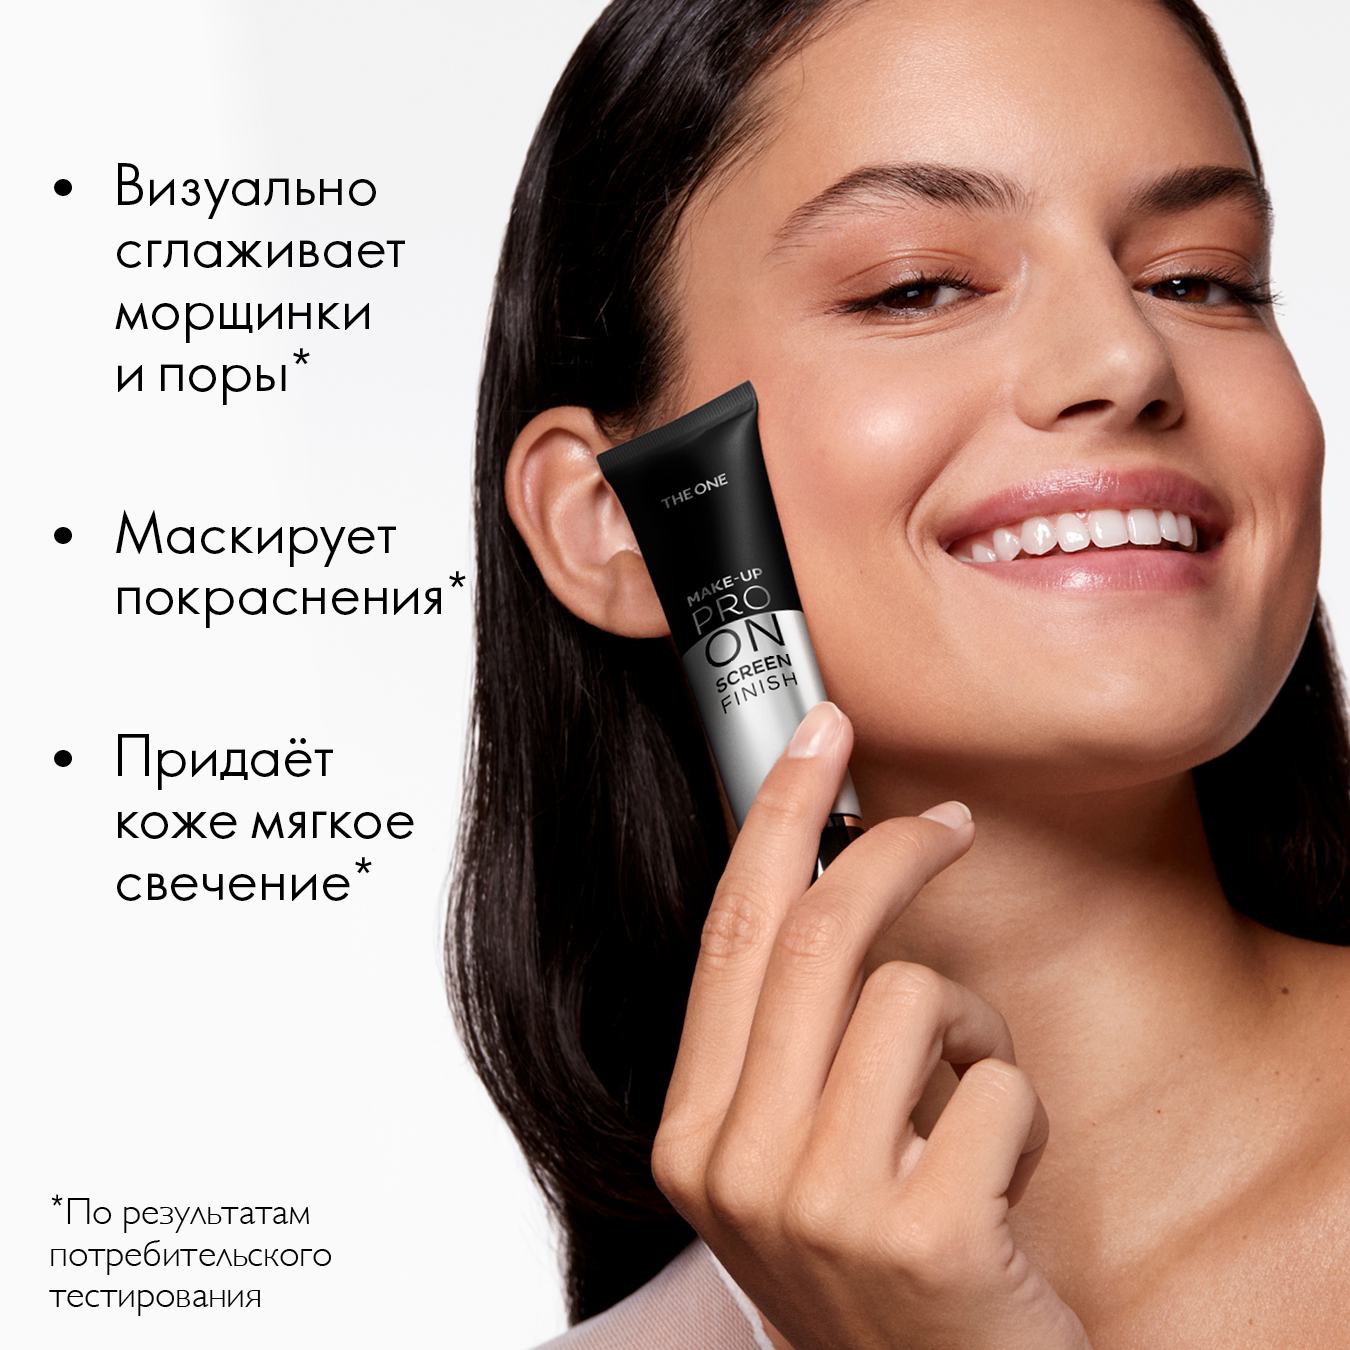 https://media-cdn.oriflame.com/productImage?externalMediaId=product-management-media%2fProducts%2f44547%2fKG%2f44547_6.png&id=17749214&version=1